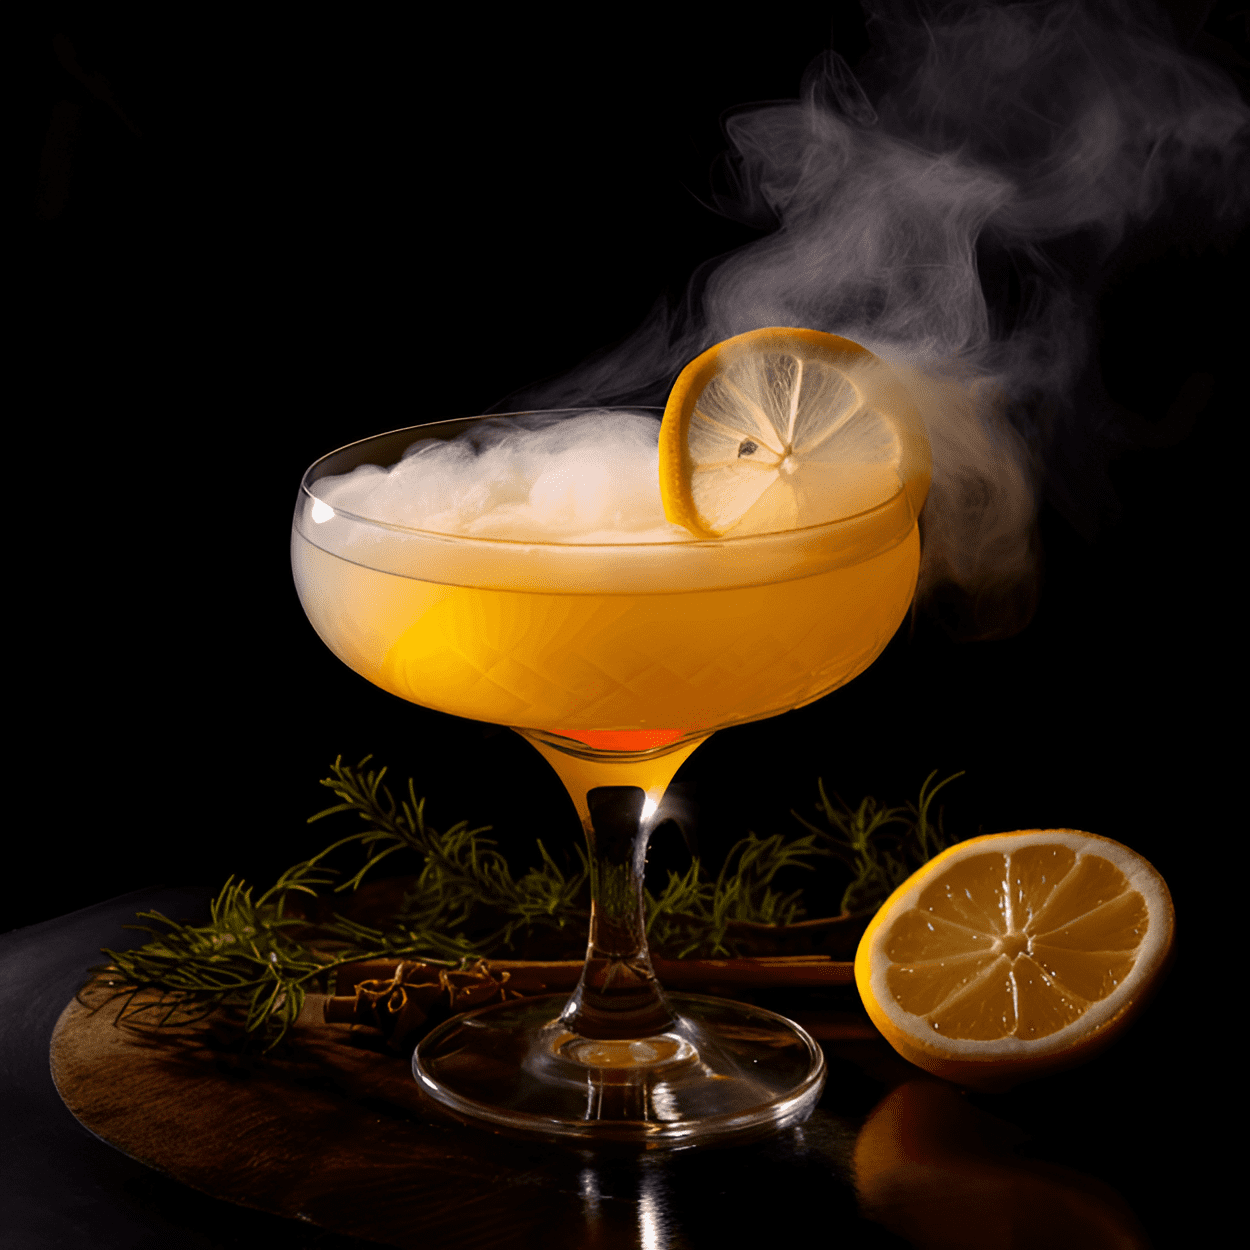 The White Lightning cocktail is a potent, strong drink with a fiery kick. It has a robust, full-bodied flavor with a hint of sweetness from the sugar. The lemon juice adds a touch of sourness, balancing out the strong alcohol taste.